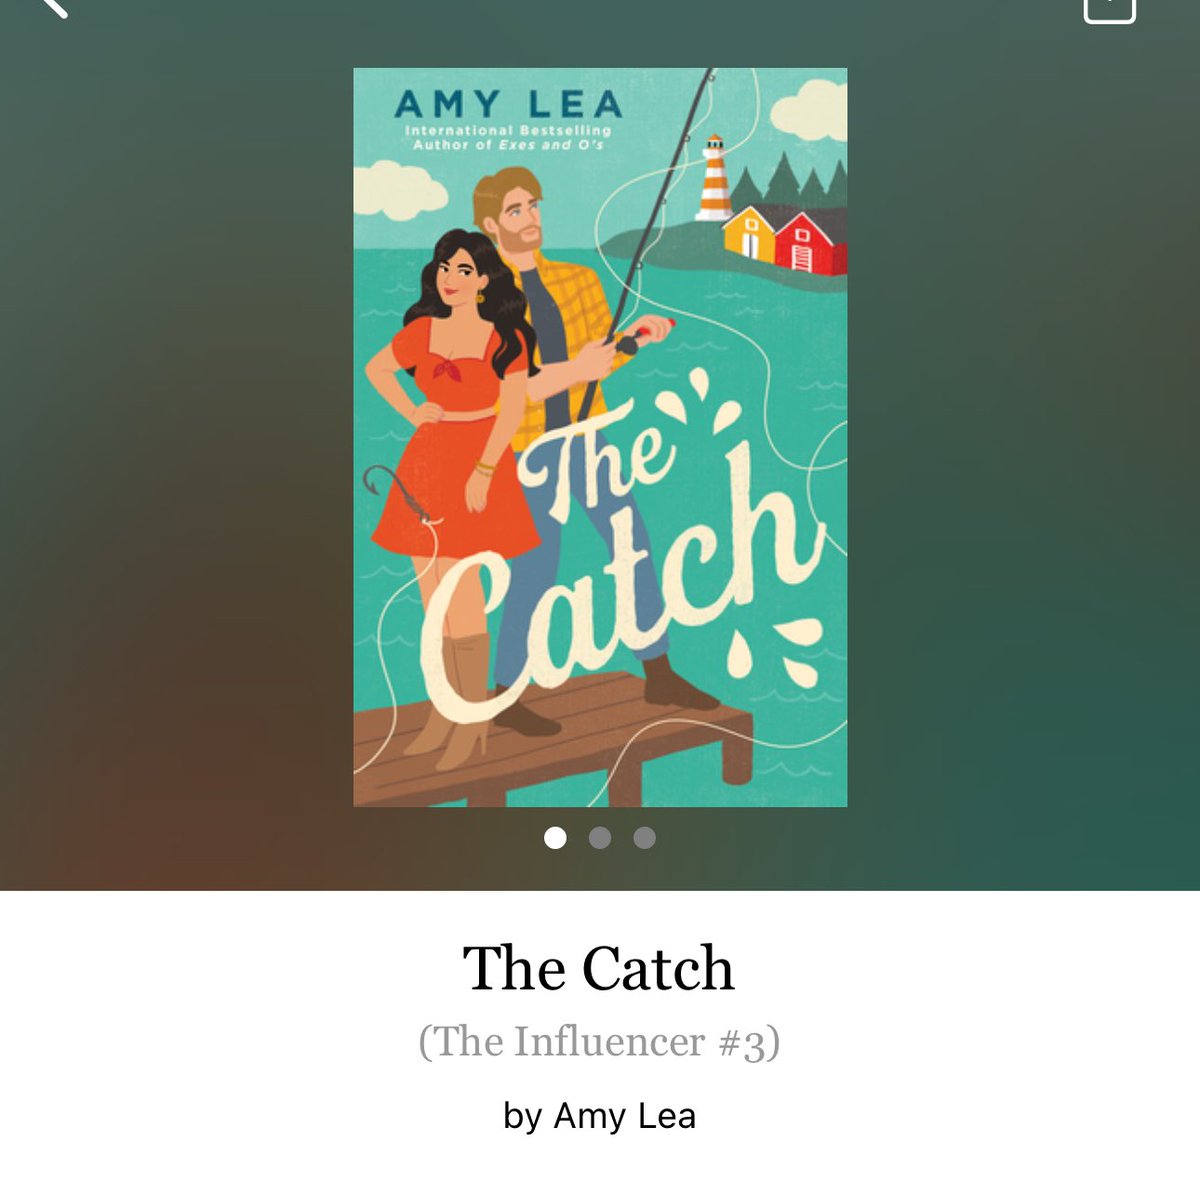 The Catch by Amy Lea 

#TheCatch by #AmyLea #6224 #39chapters #416pages #373of400 #NewRelease #audiobook #10for3 #Series #TheInfluencerSeries #Book3of3 #MelanieAndEvan #april2024 #clearingoffreadingshelves #whatsnext #readitquick